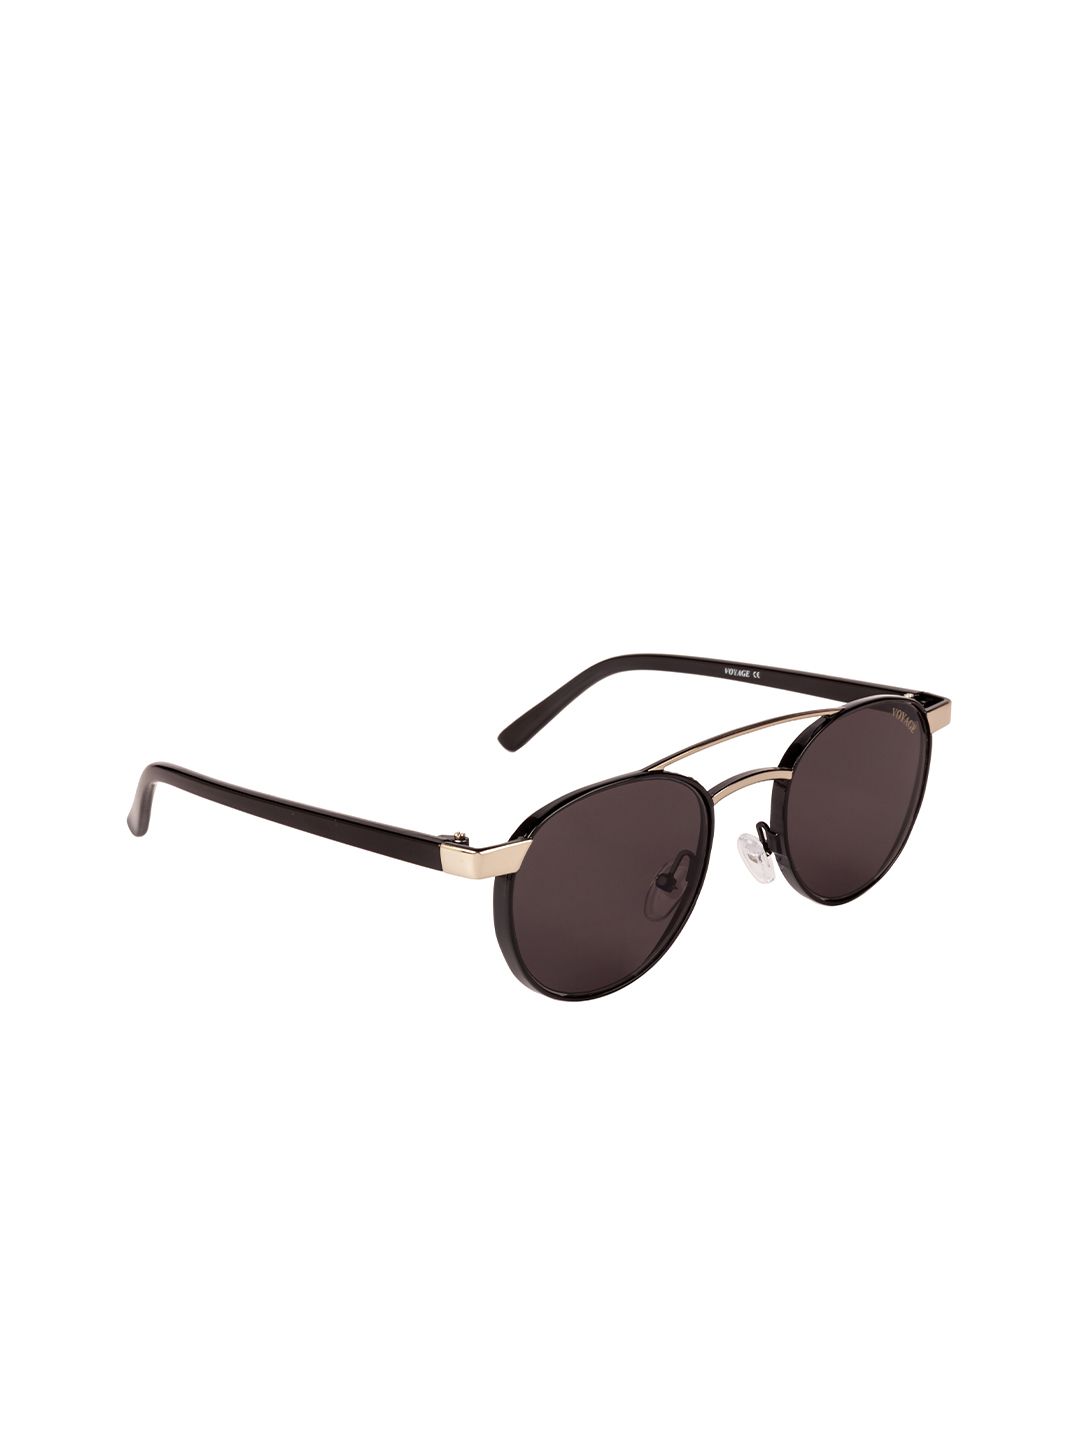 Voyage Unisex Black Lens & Black Round Sunglasses with UV Protected Lens B80496MG3503Z Price in India